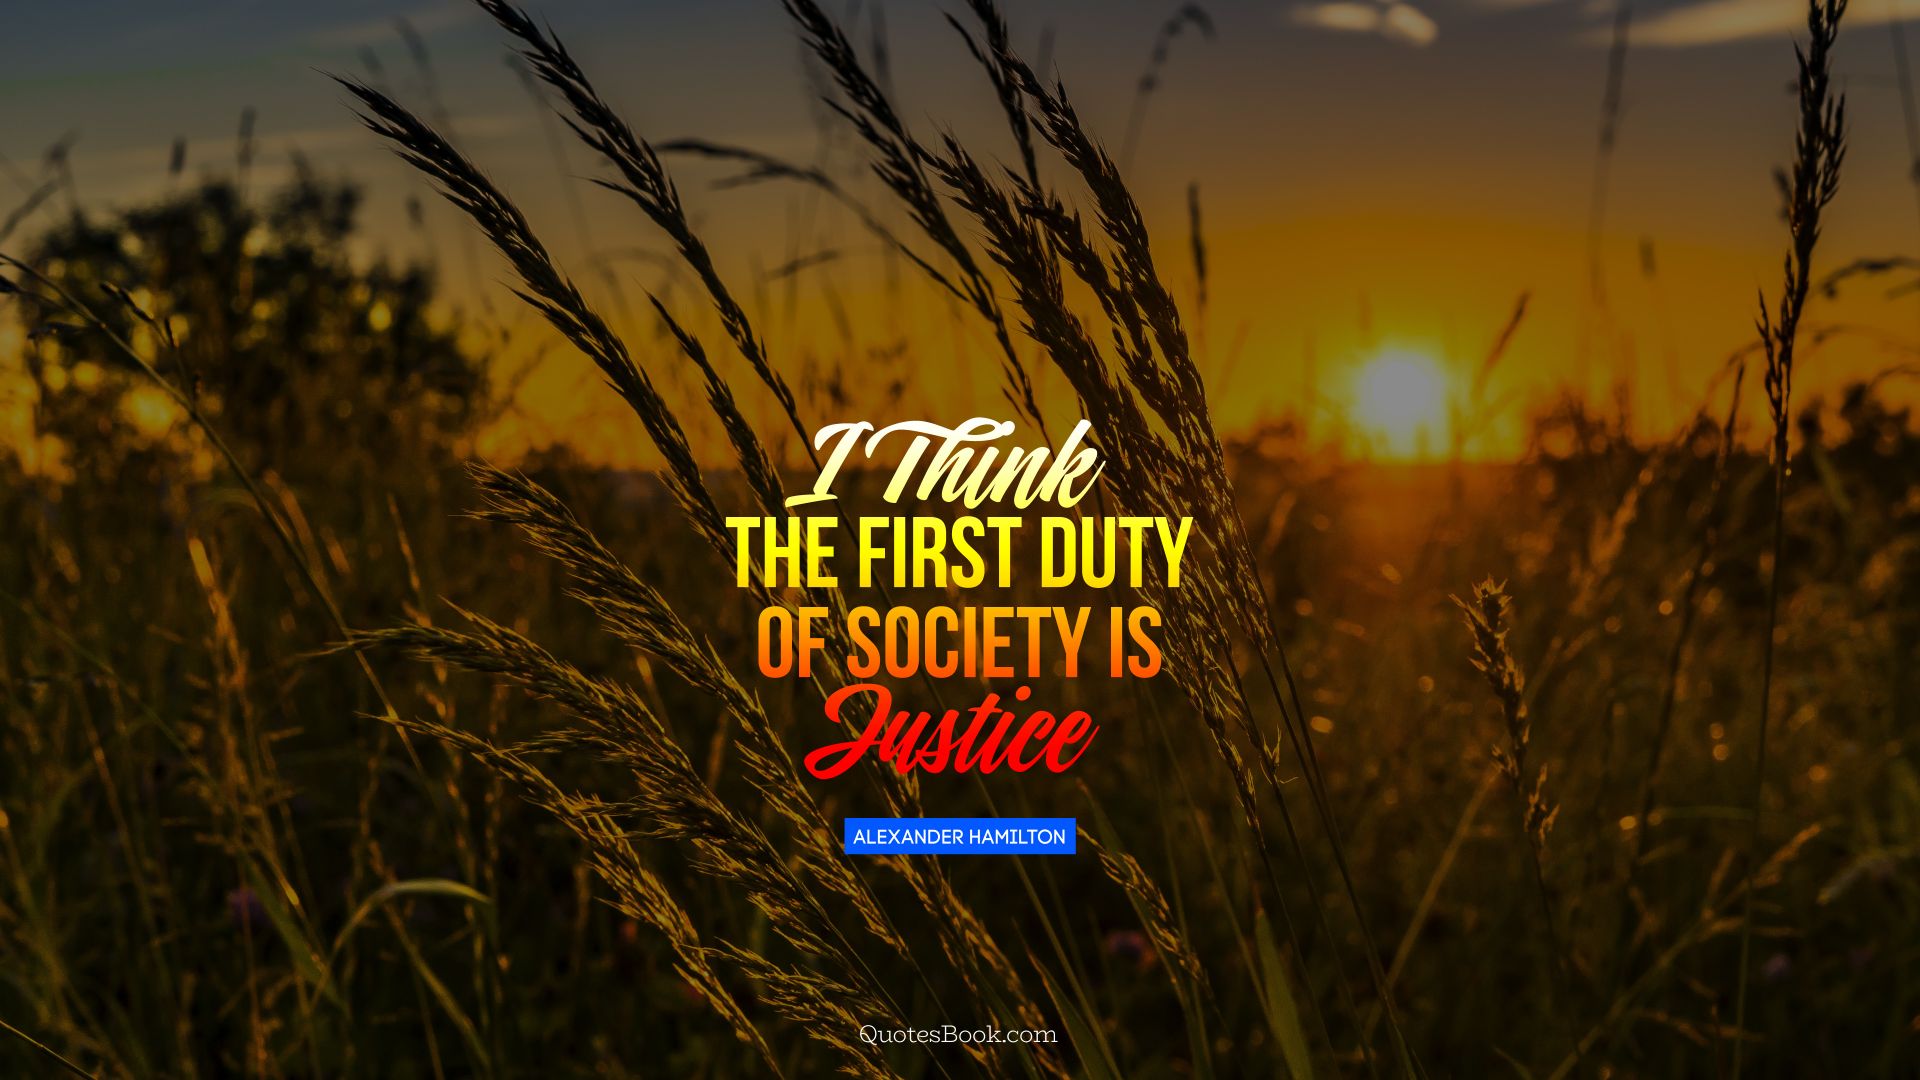 I think the first duty of society is justice. - Quote by Alexander Hamilton